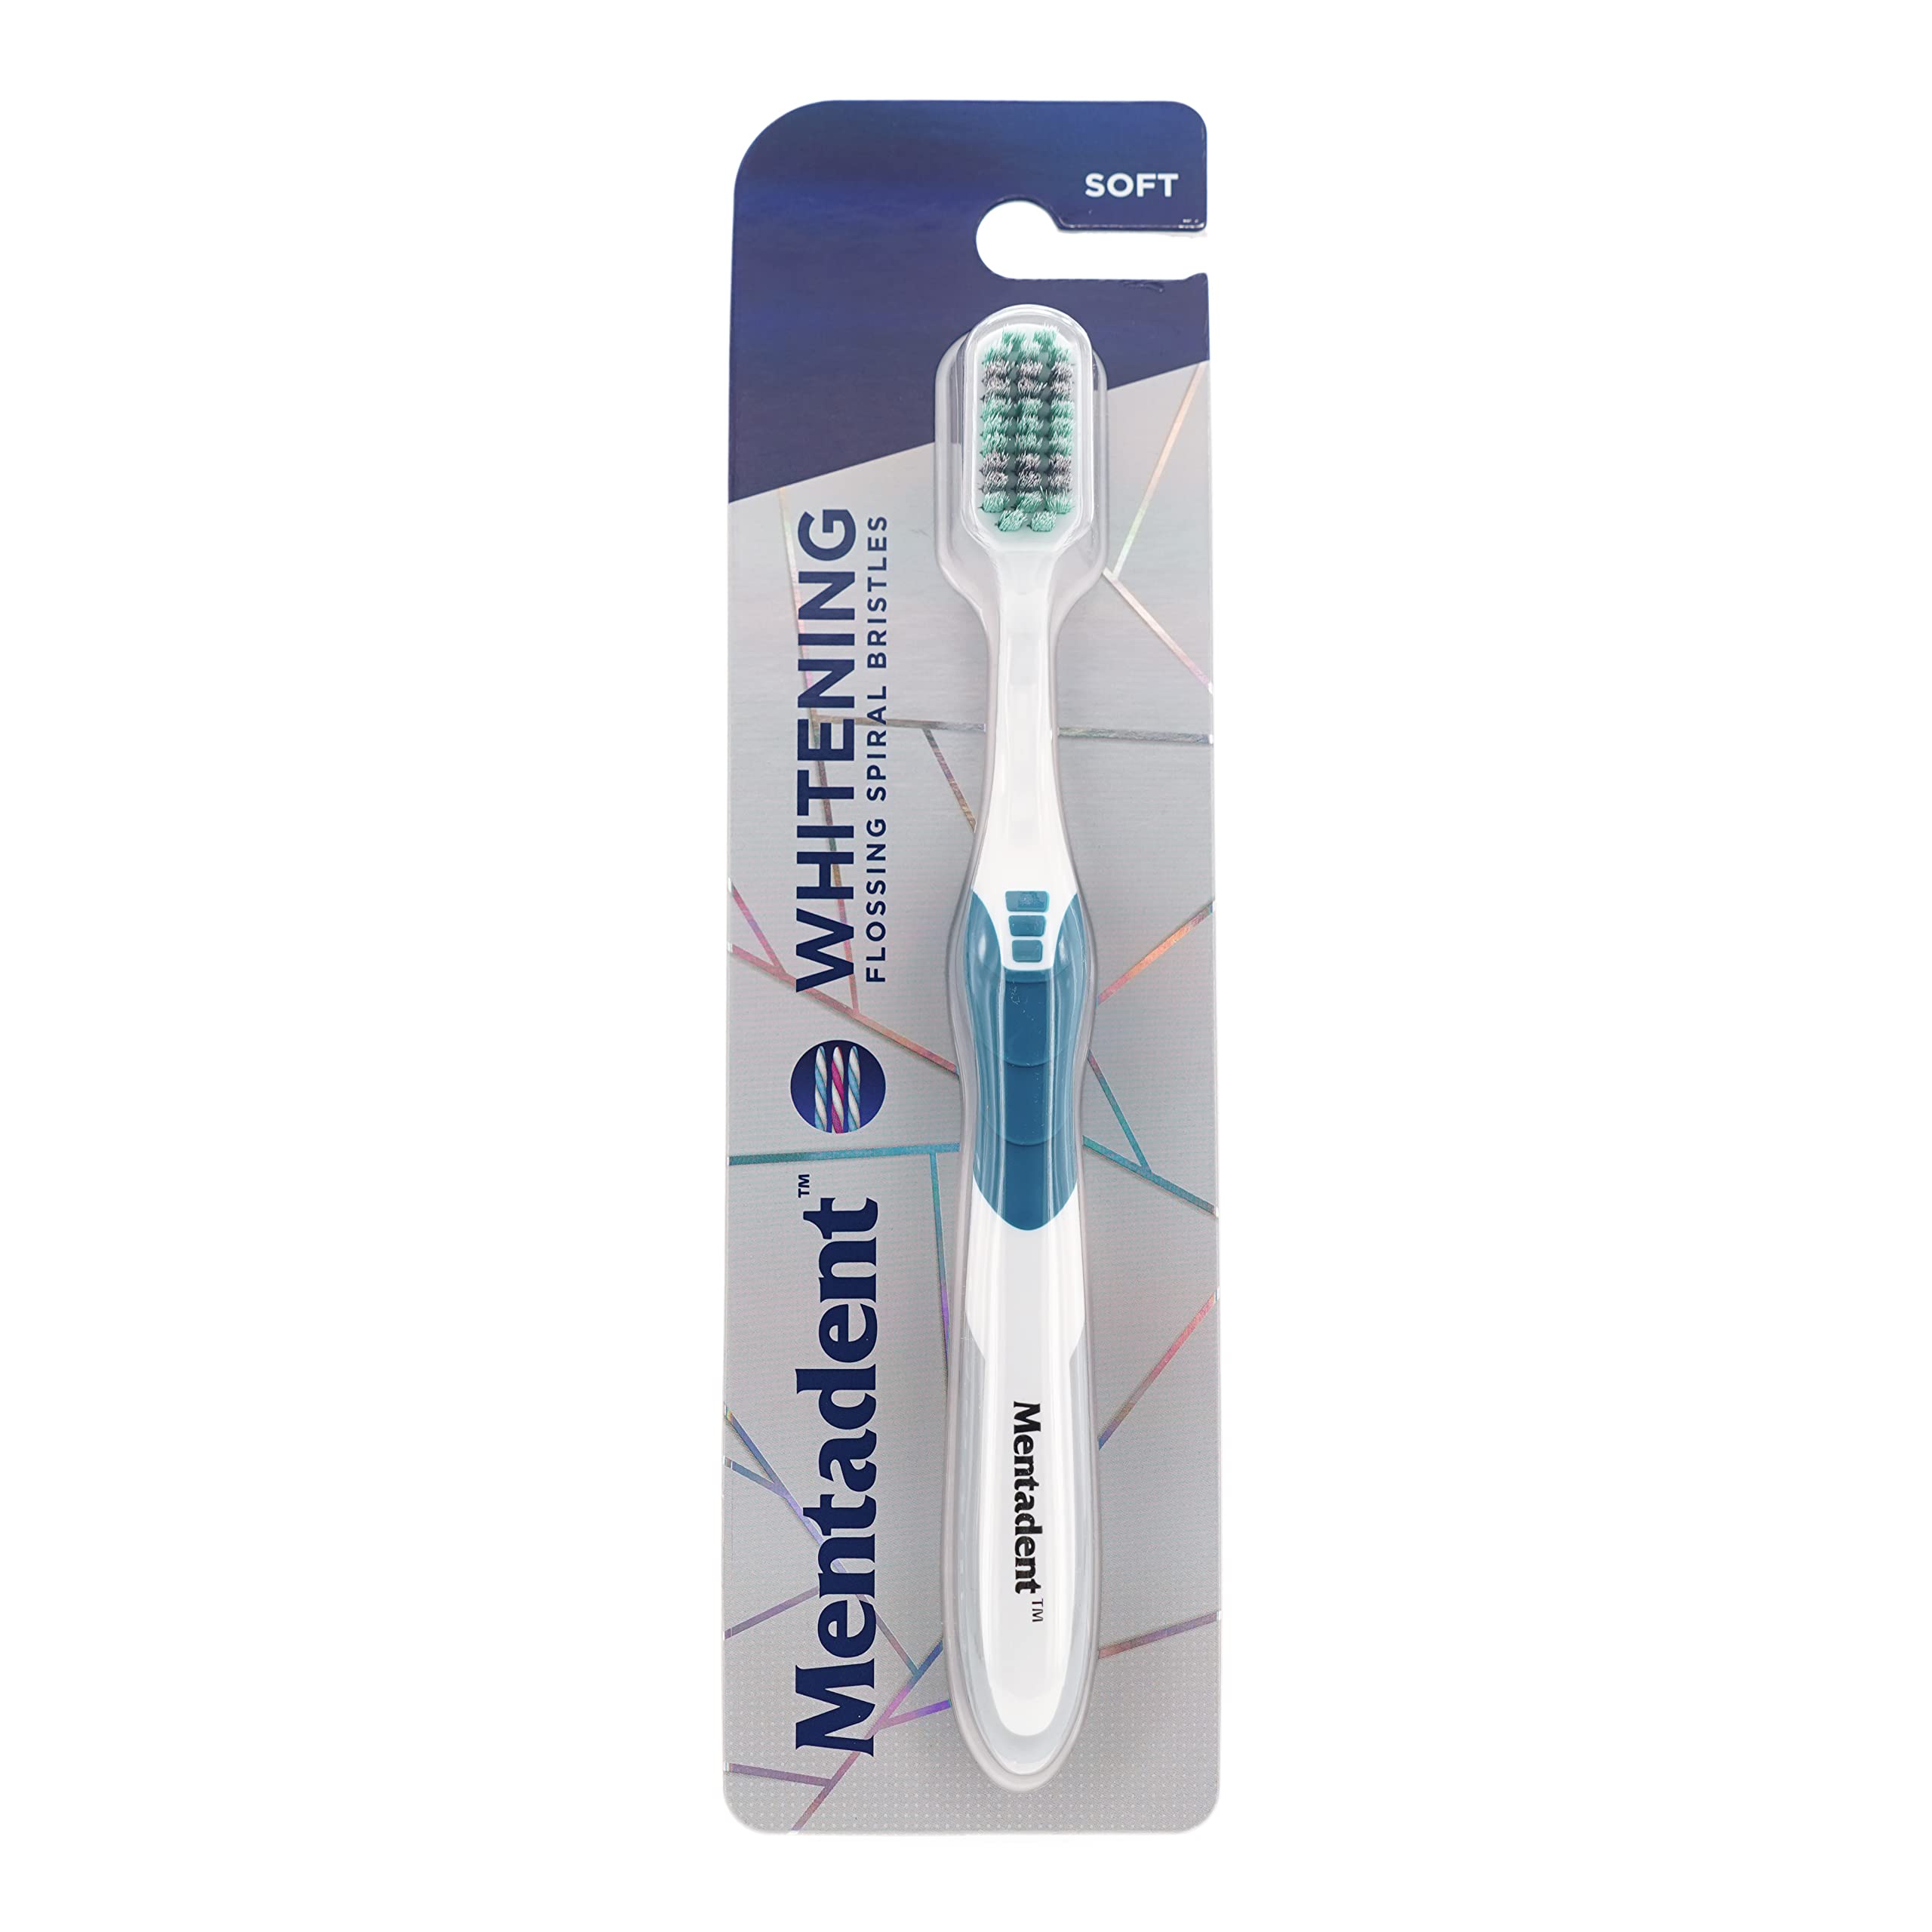 GuruNanda Mentadent Toothbrush Soft Toothbrush for Kids & Adults, Tooth Brush for Teeth Whitening, Travel Toothbrushes, Soft Bristles for Your Sensitive Gums, Multicolor (20-22-001-08108-24)